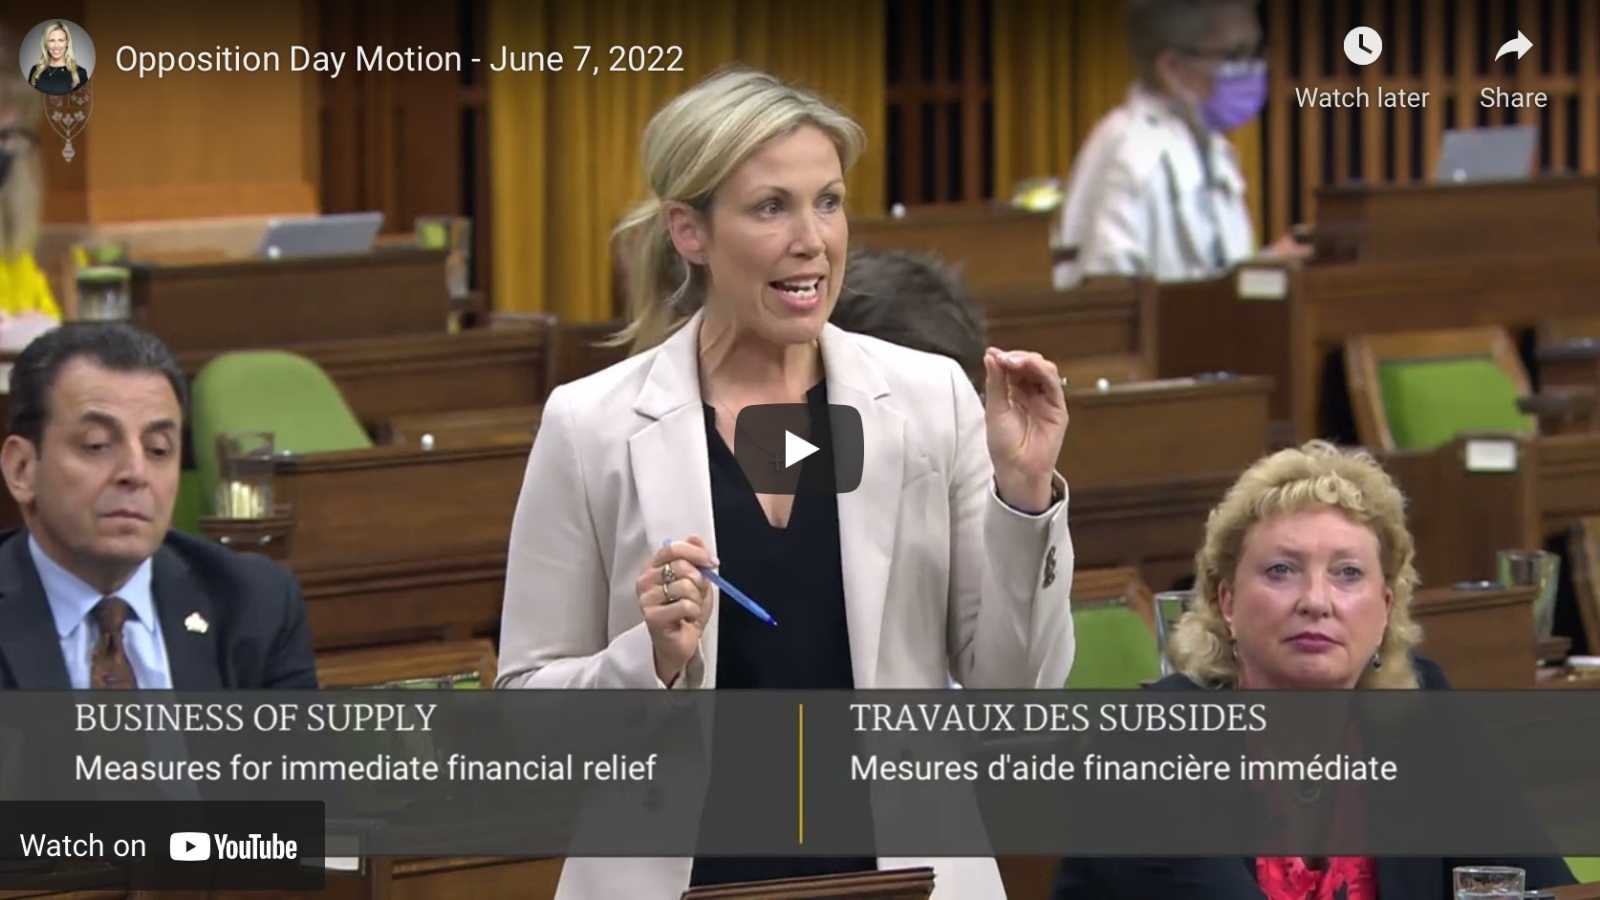 Shelby Kramp-Neuman standing in the House of Commons on June 7th 2022